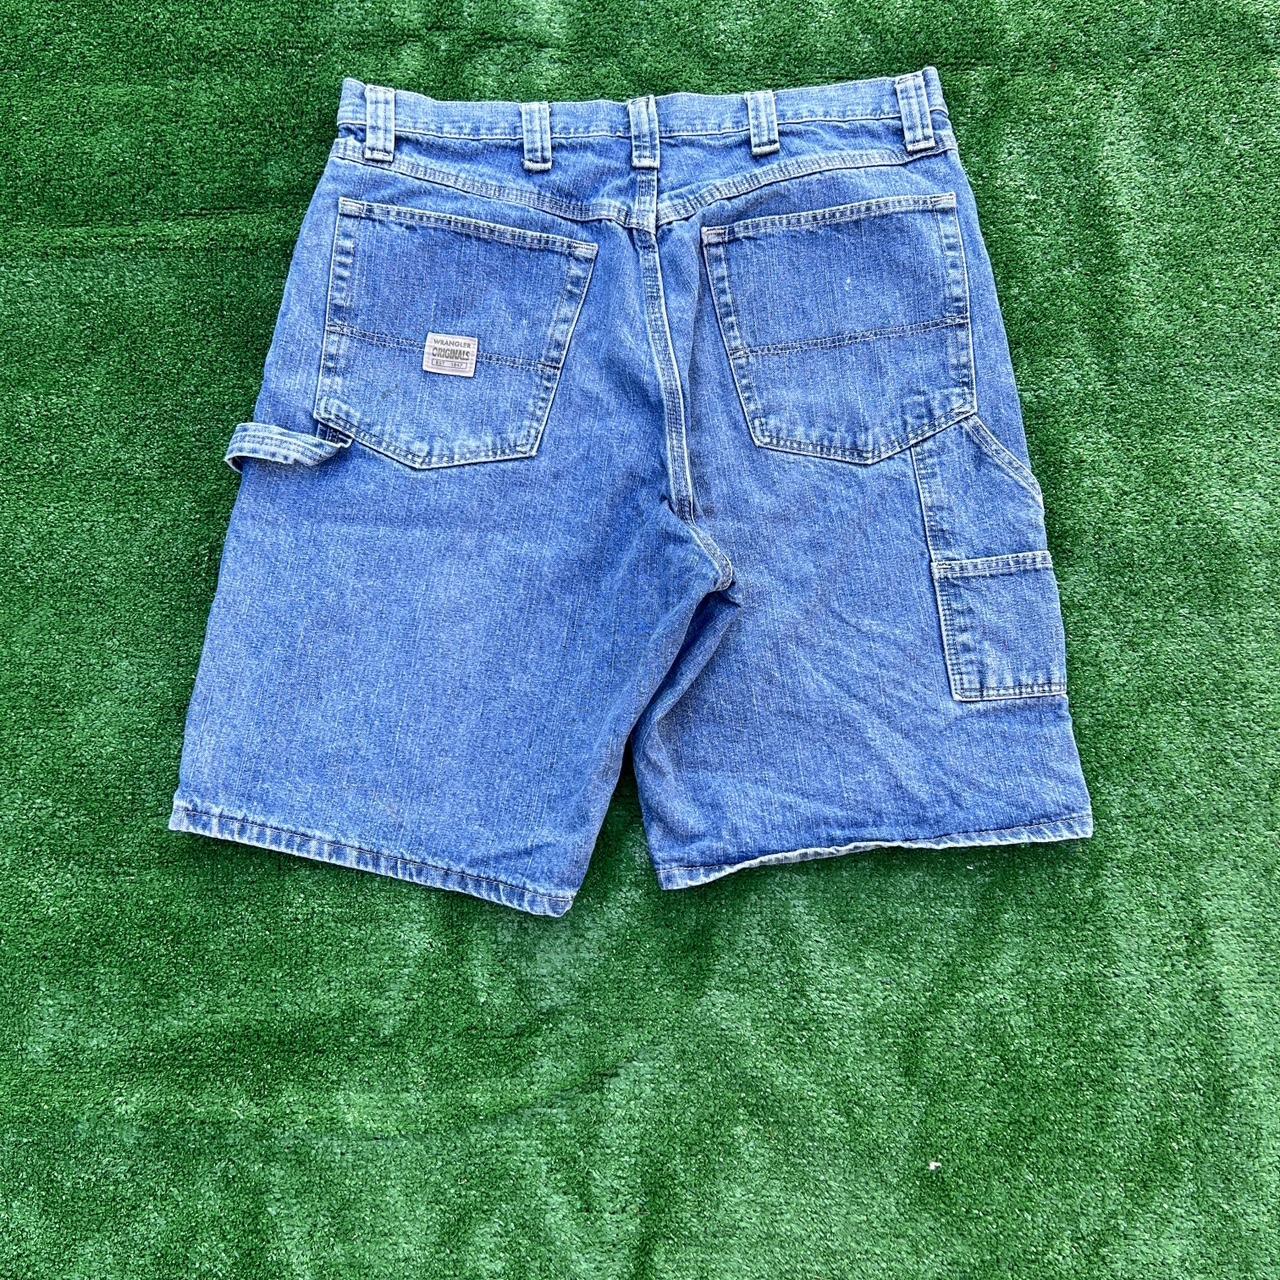 WRANGLER JEAN SHORTS - AMAZING QUALITY - TAGGED A... - Depop